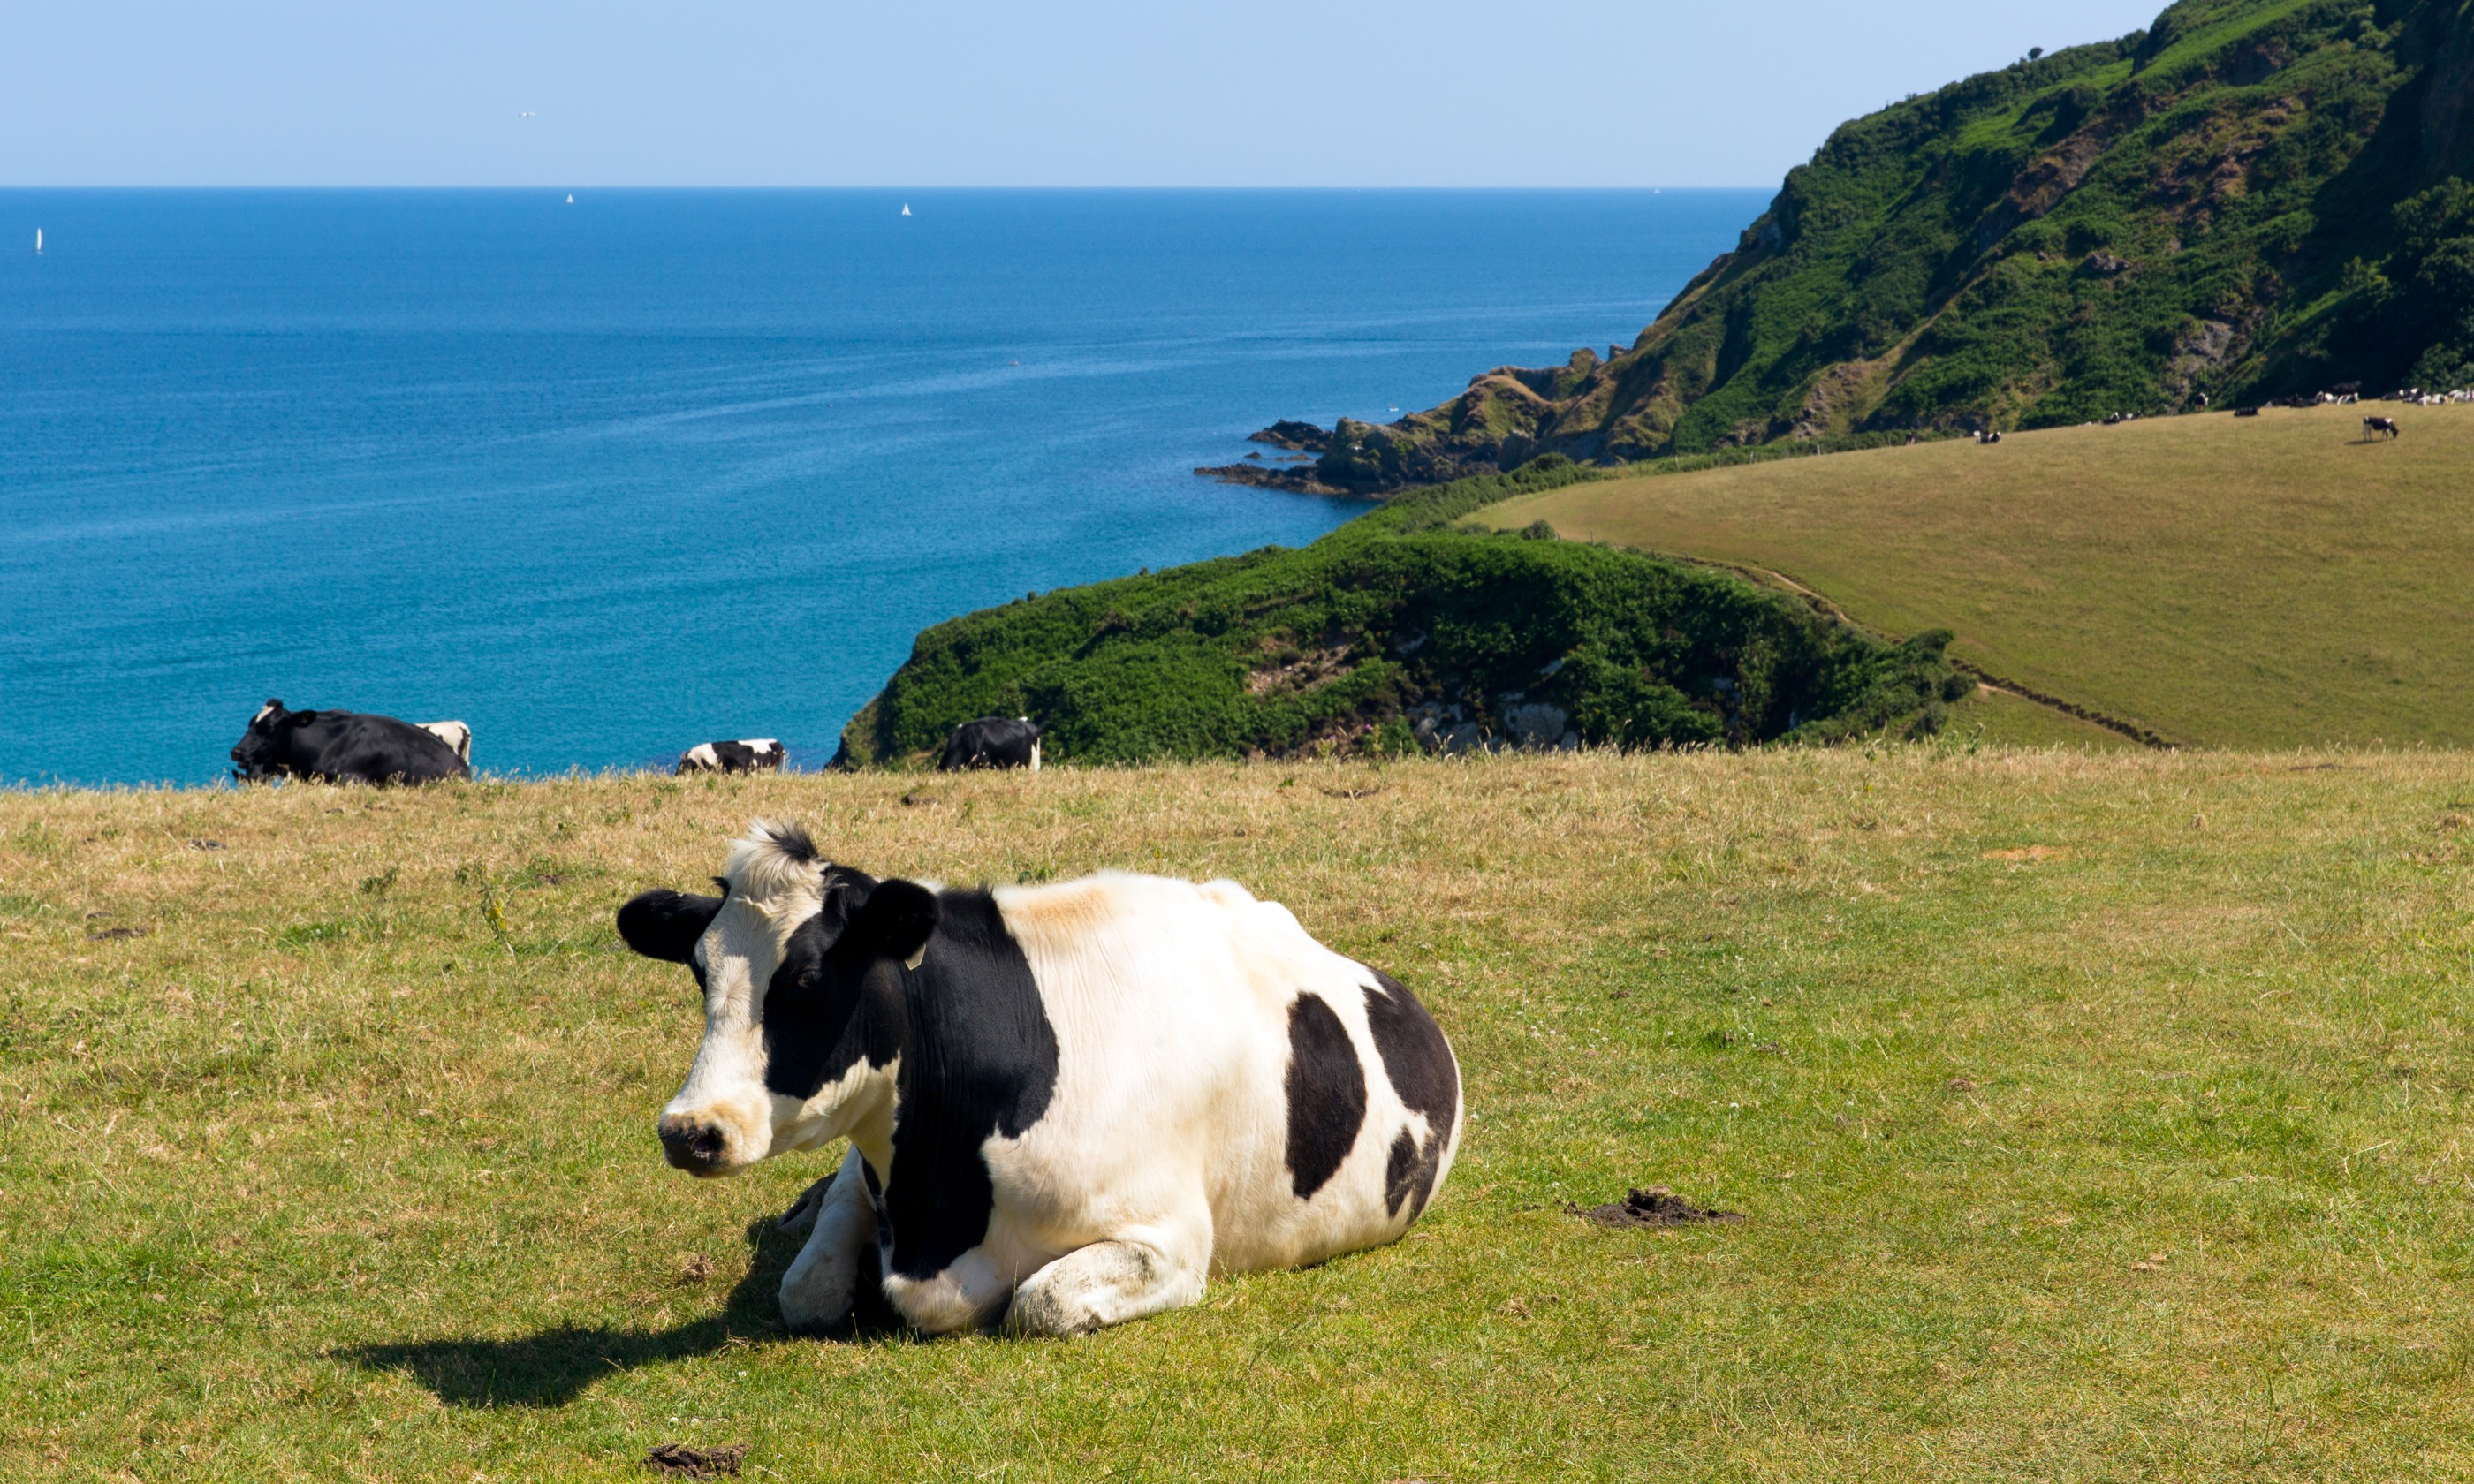 Cows in Cornwall (Shutterstock.com)